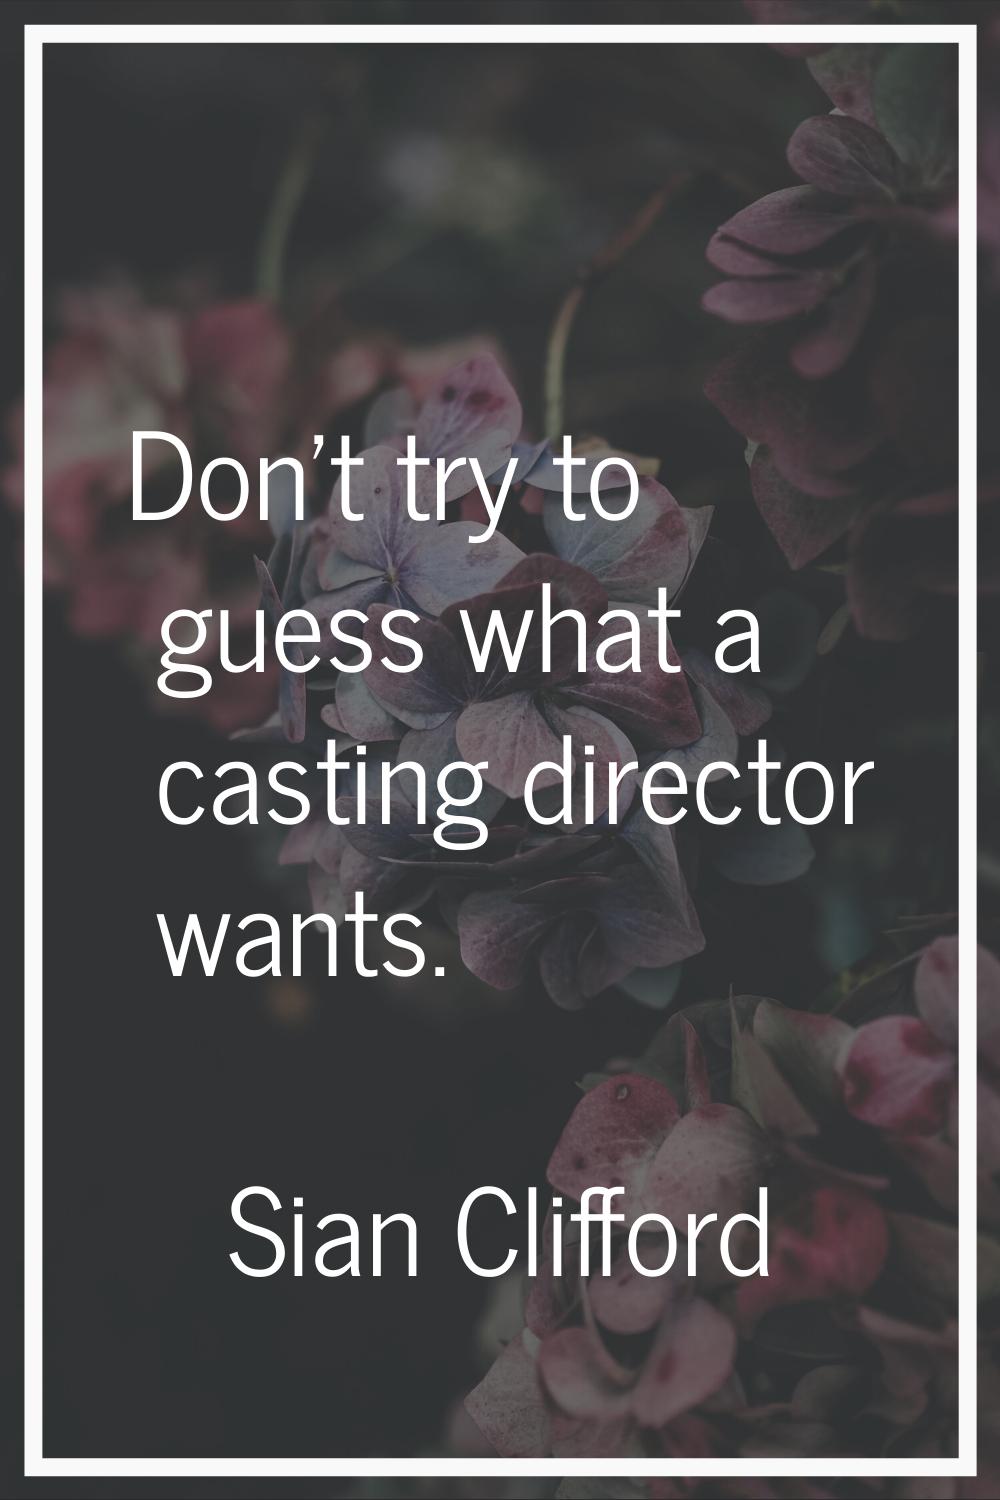 Don't try to guess what a casting director wants.